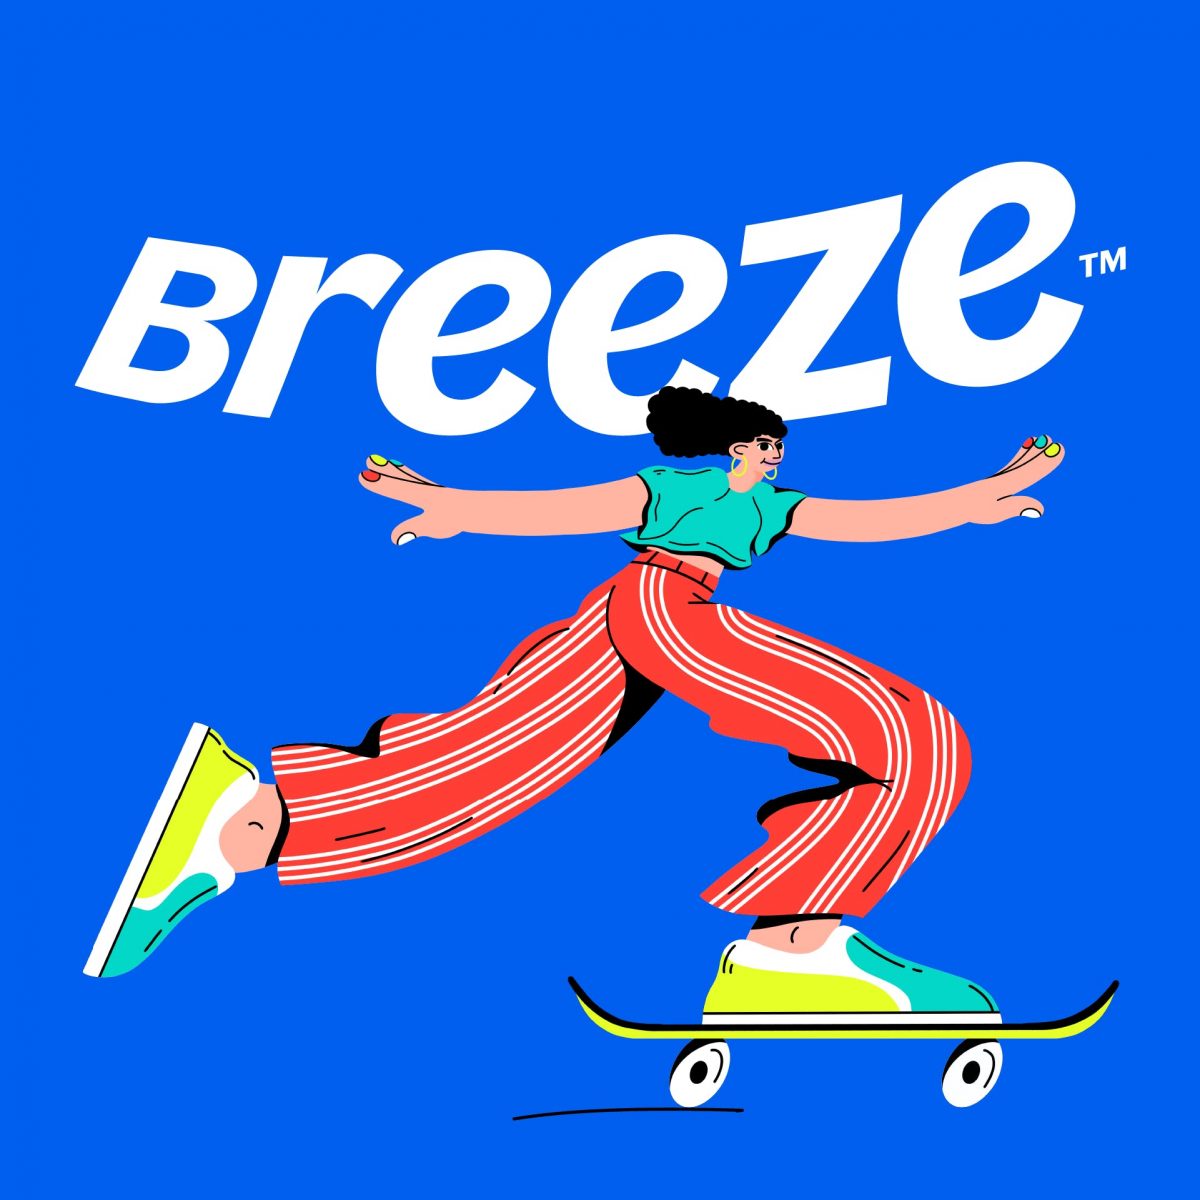 Leeds City Council launches bold rebrand of youth platform Breeze [Video]